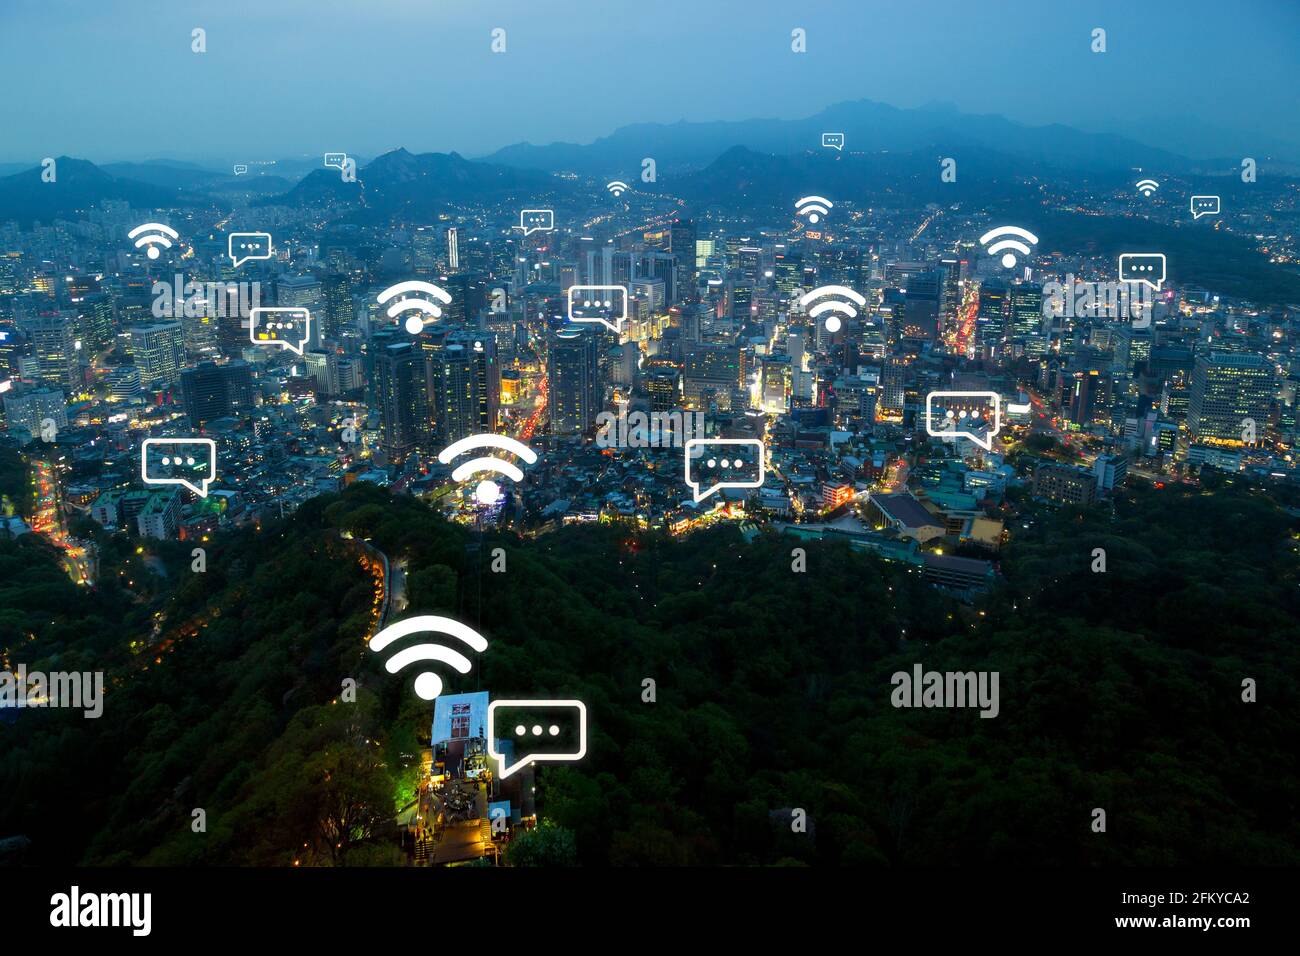 Wi-Fi and online message icons on city skyline and Namsan Hill in Seoul, South Korea at dusk. Wireless network connection and smart city concept. Stock Photo